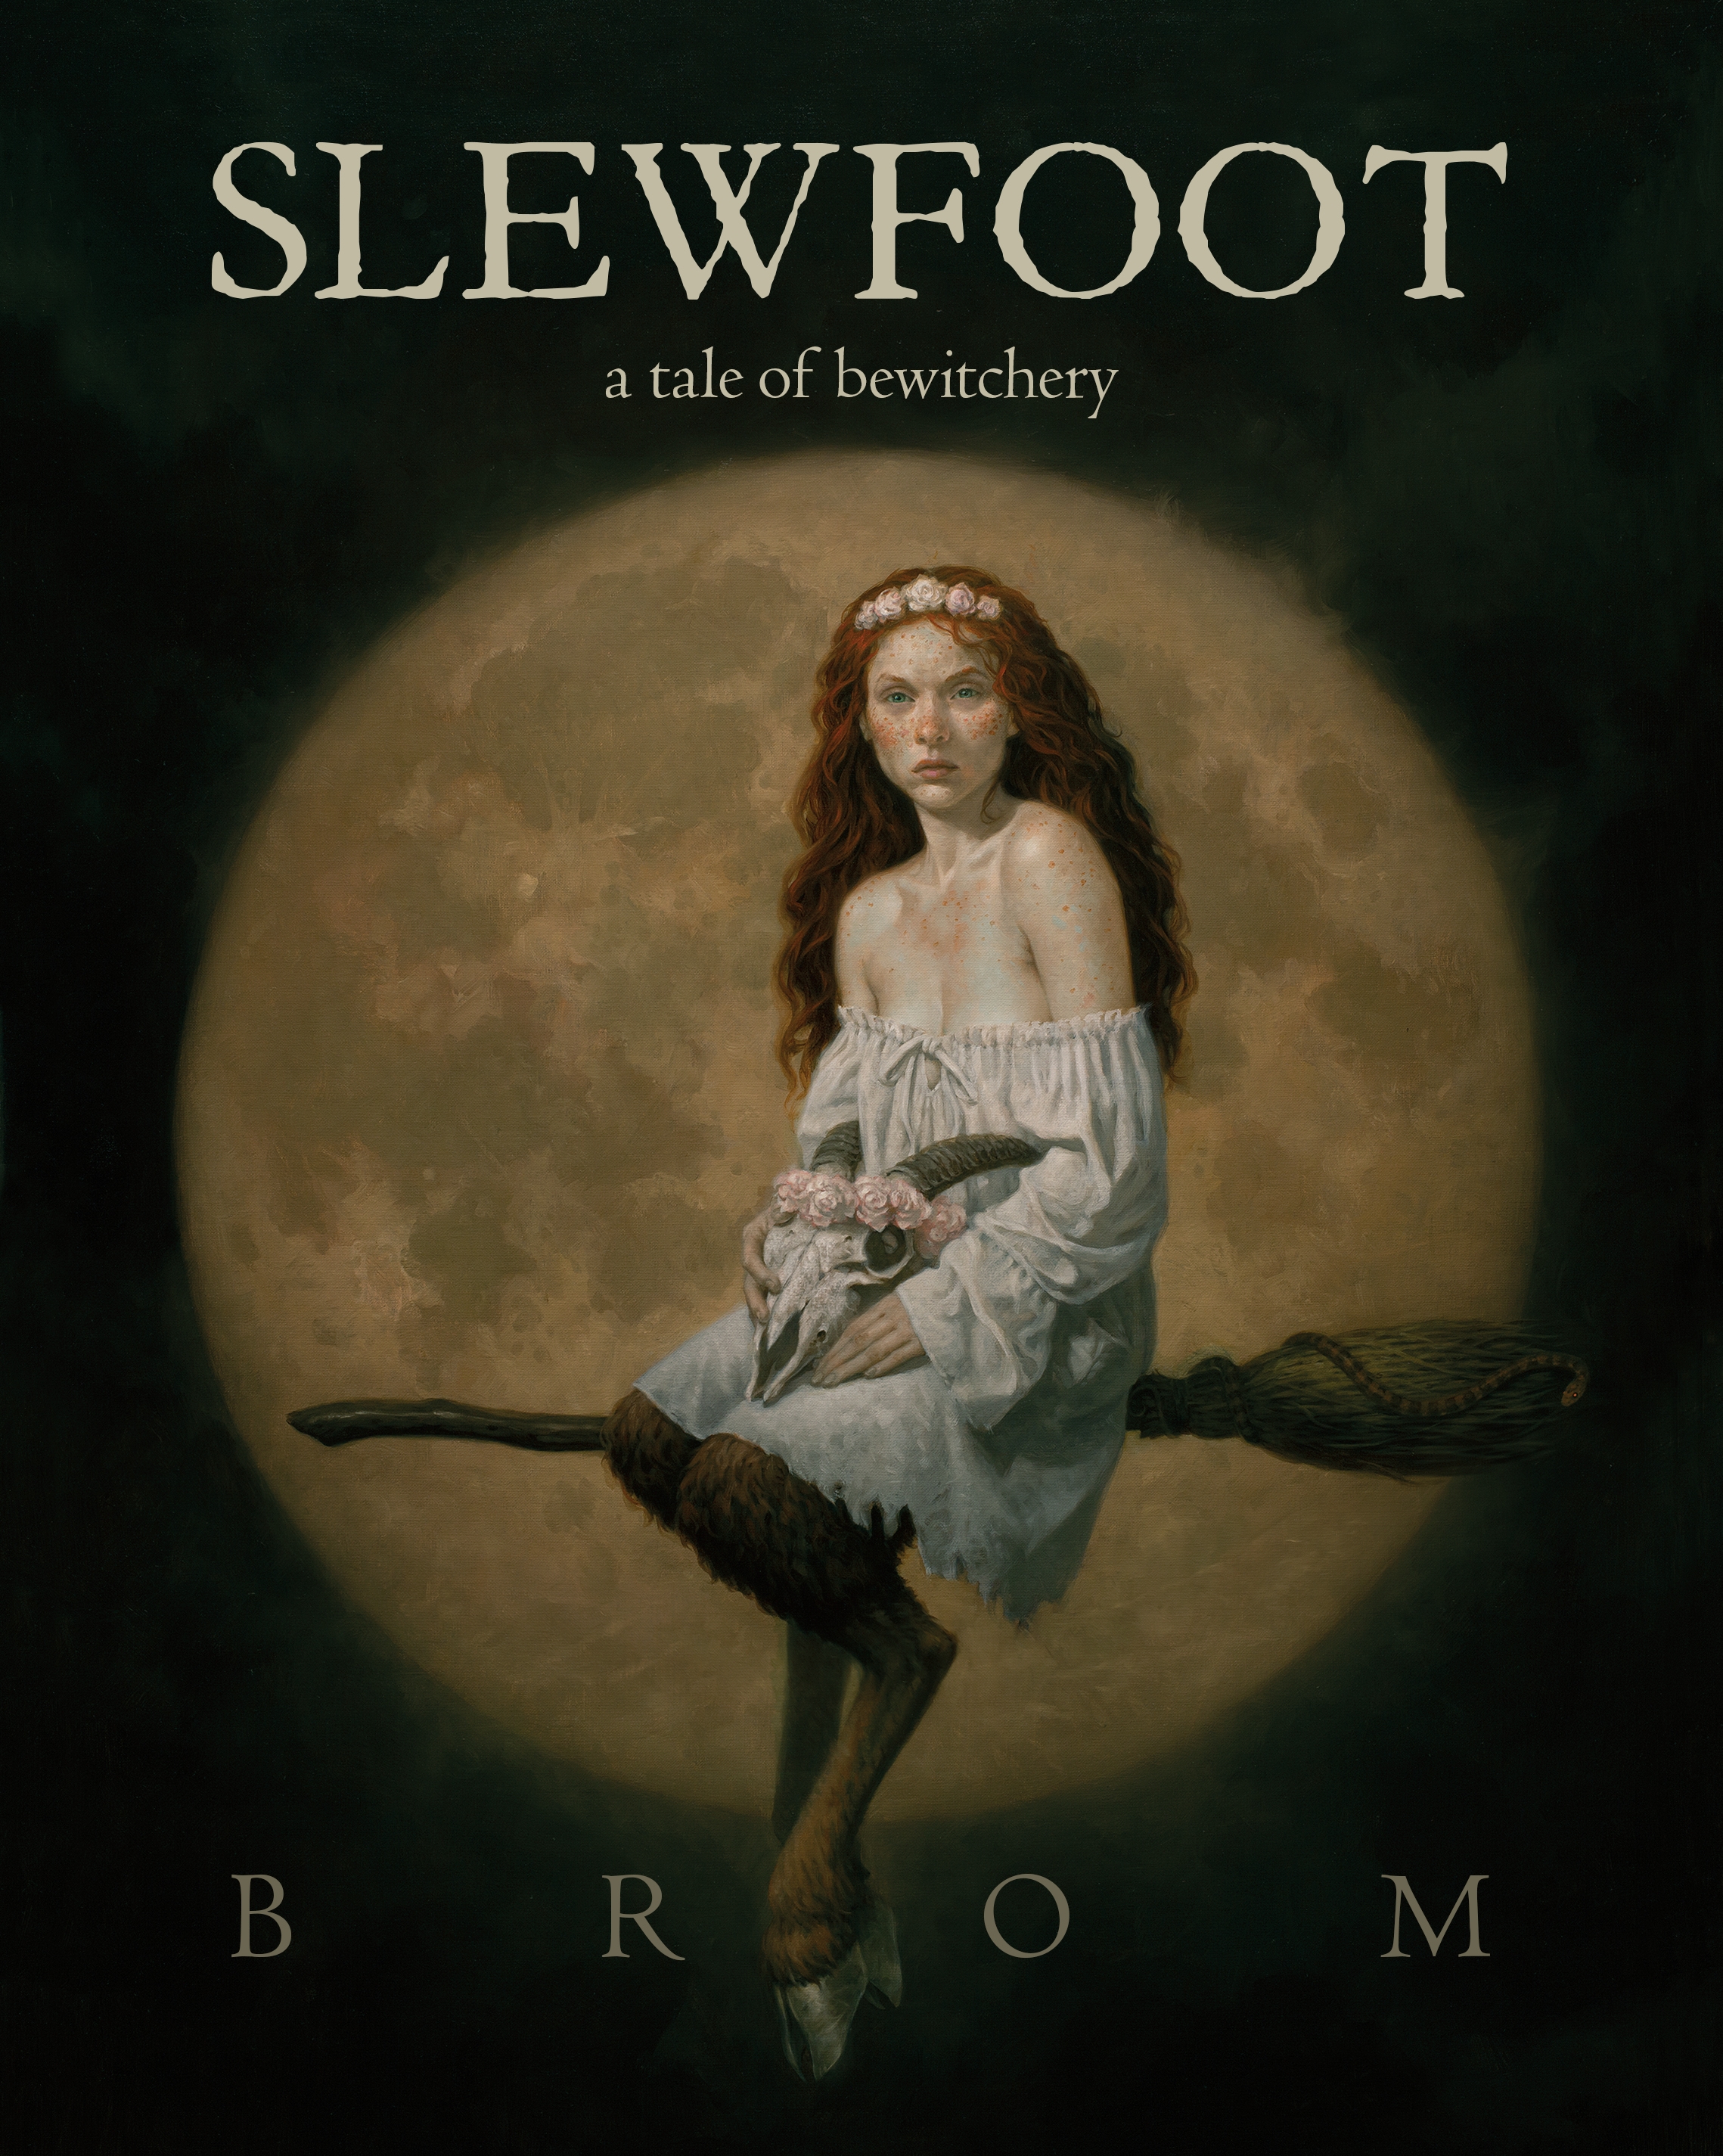 Slewfoot : A Tale of Bewitchery by Brom